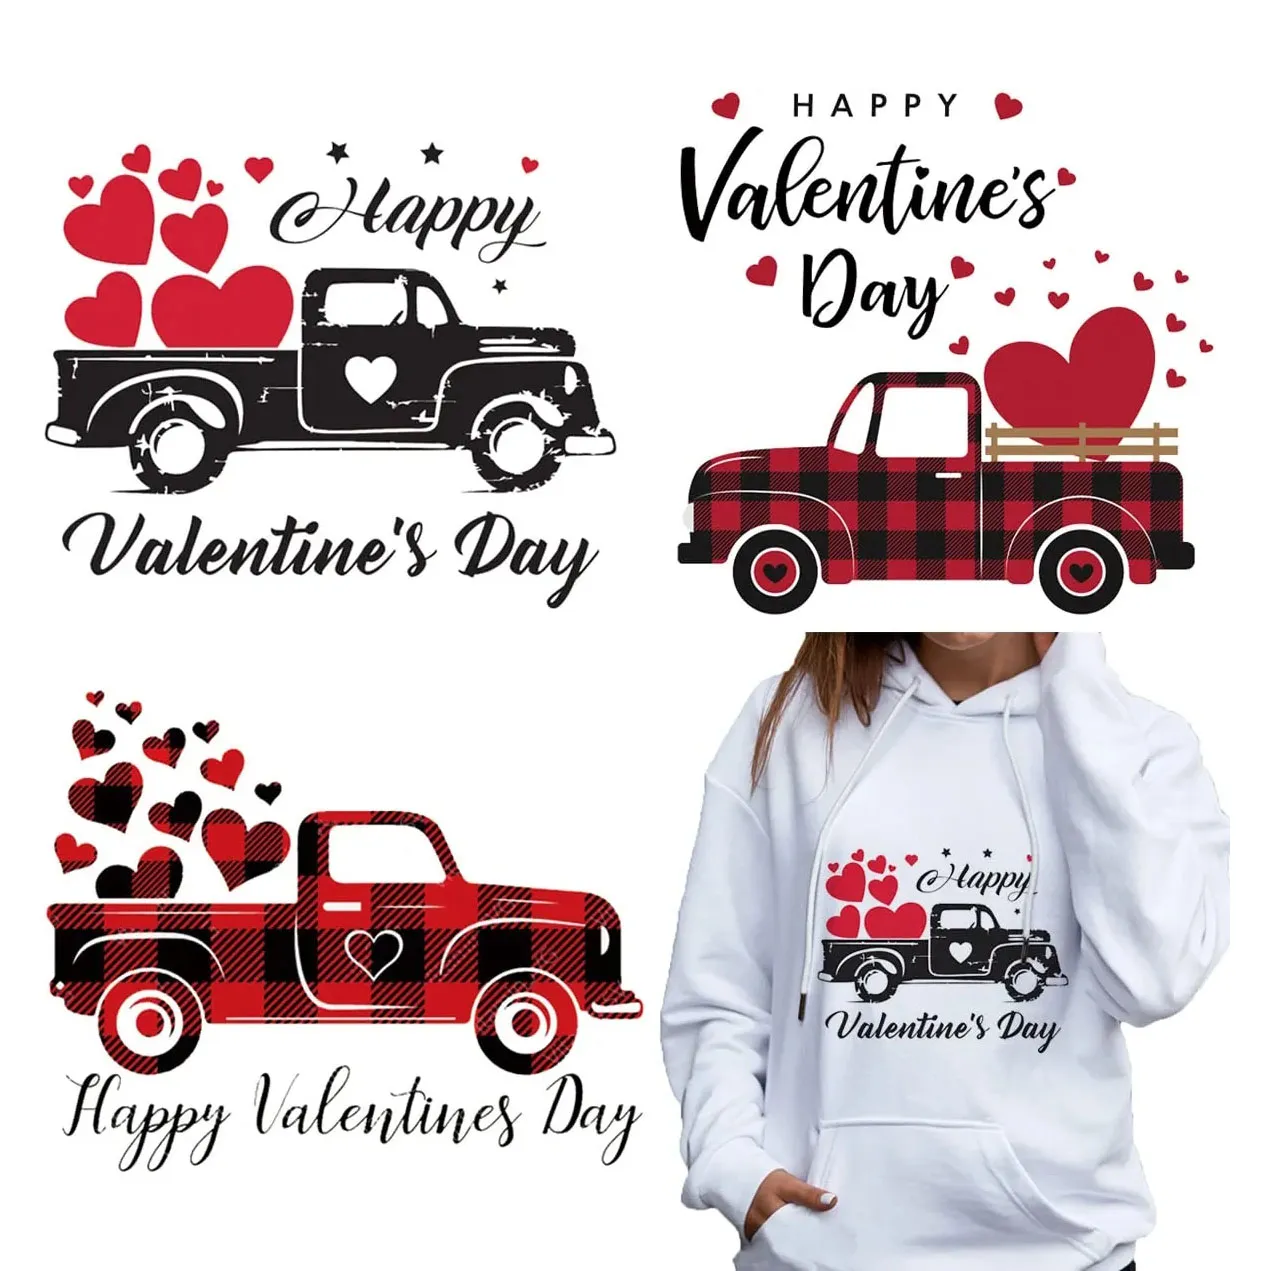 Valentine's Day Iron on Patches Decals Love Heart Buffalo Plaid Car Heat Transfer Paper Stickers for Clothing T-Shirt Jackets